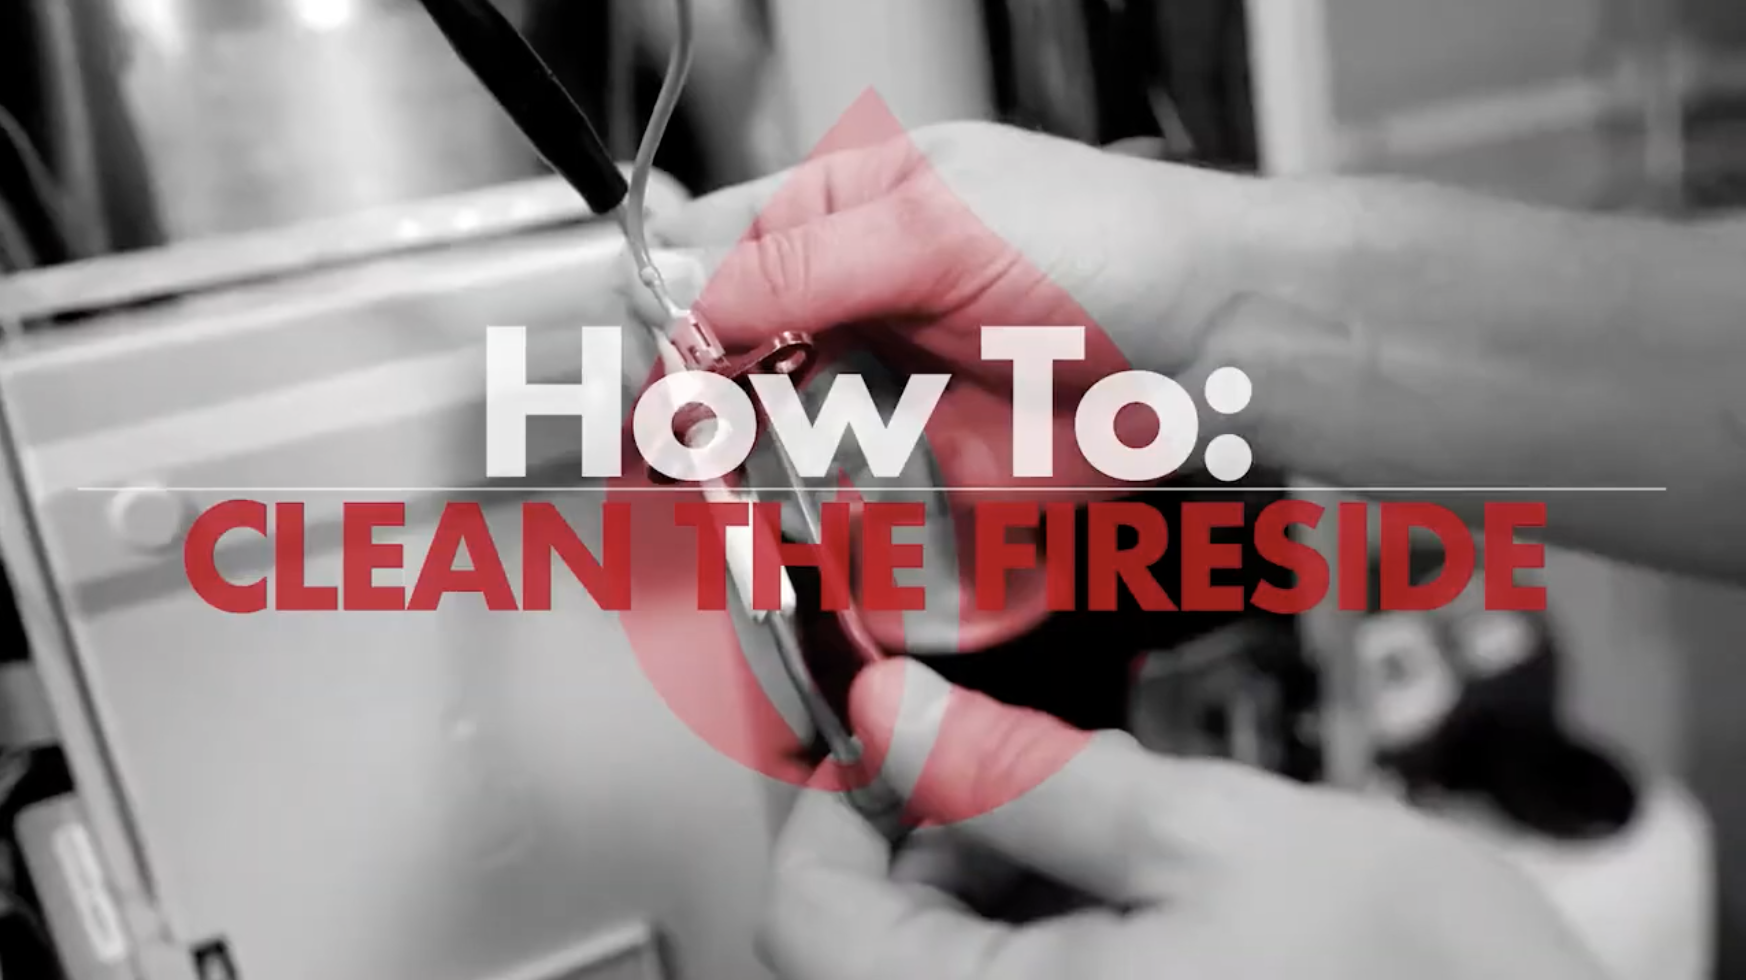 How To: Clean The Fireside